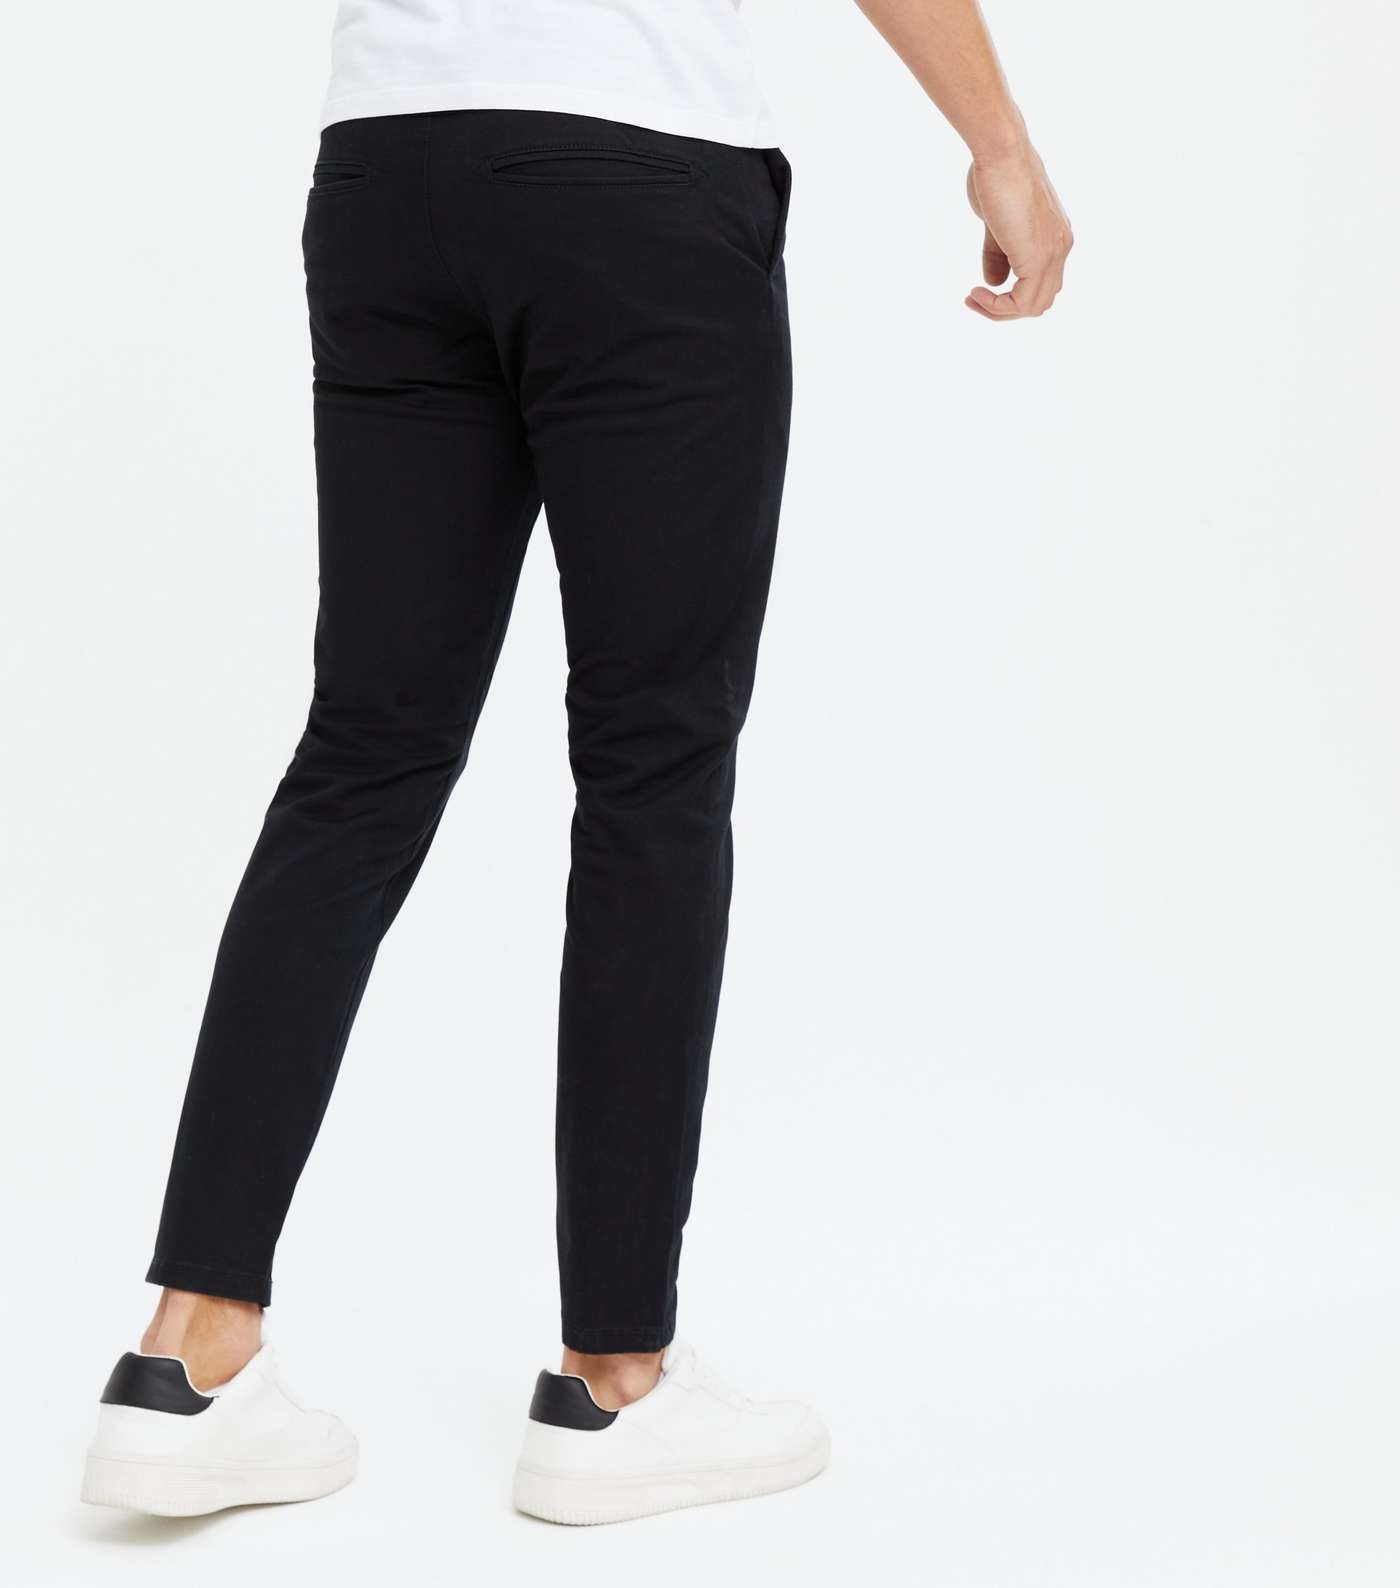 Black Skinny Stretch Cropped Trousers Image 4